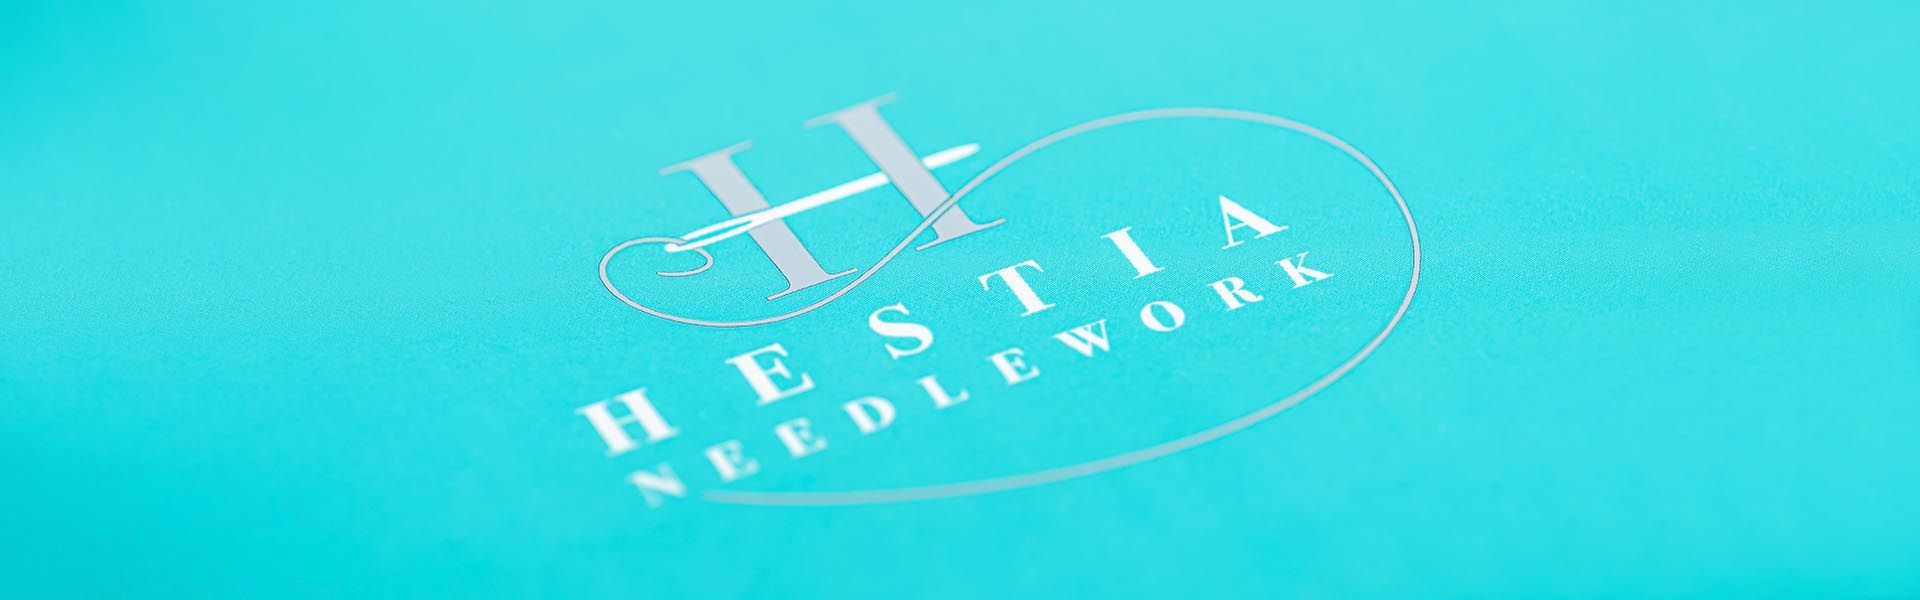 the logo for hestia needlework is on a blue background 